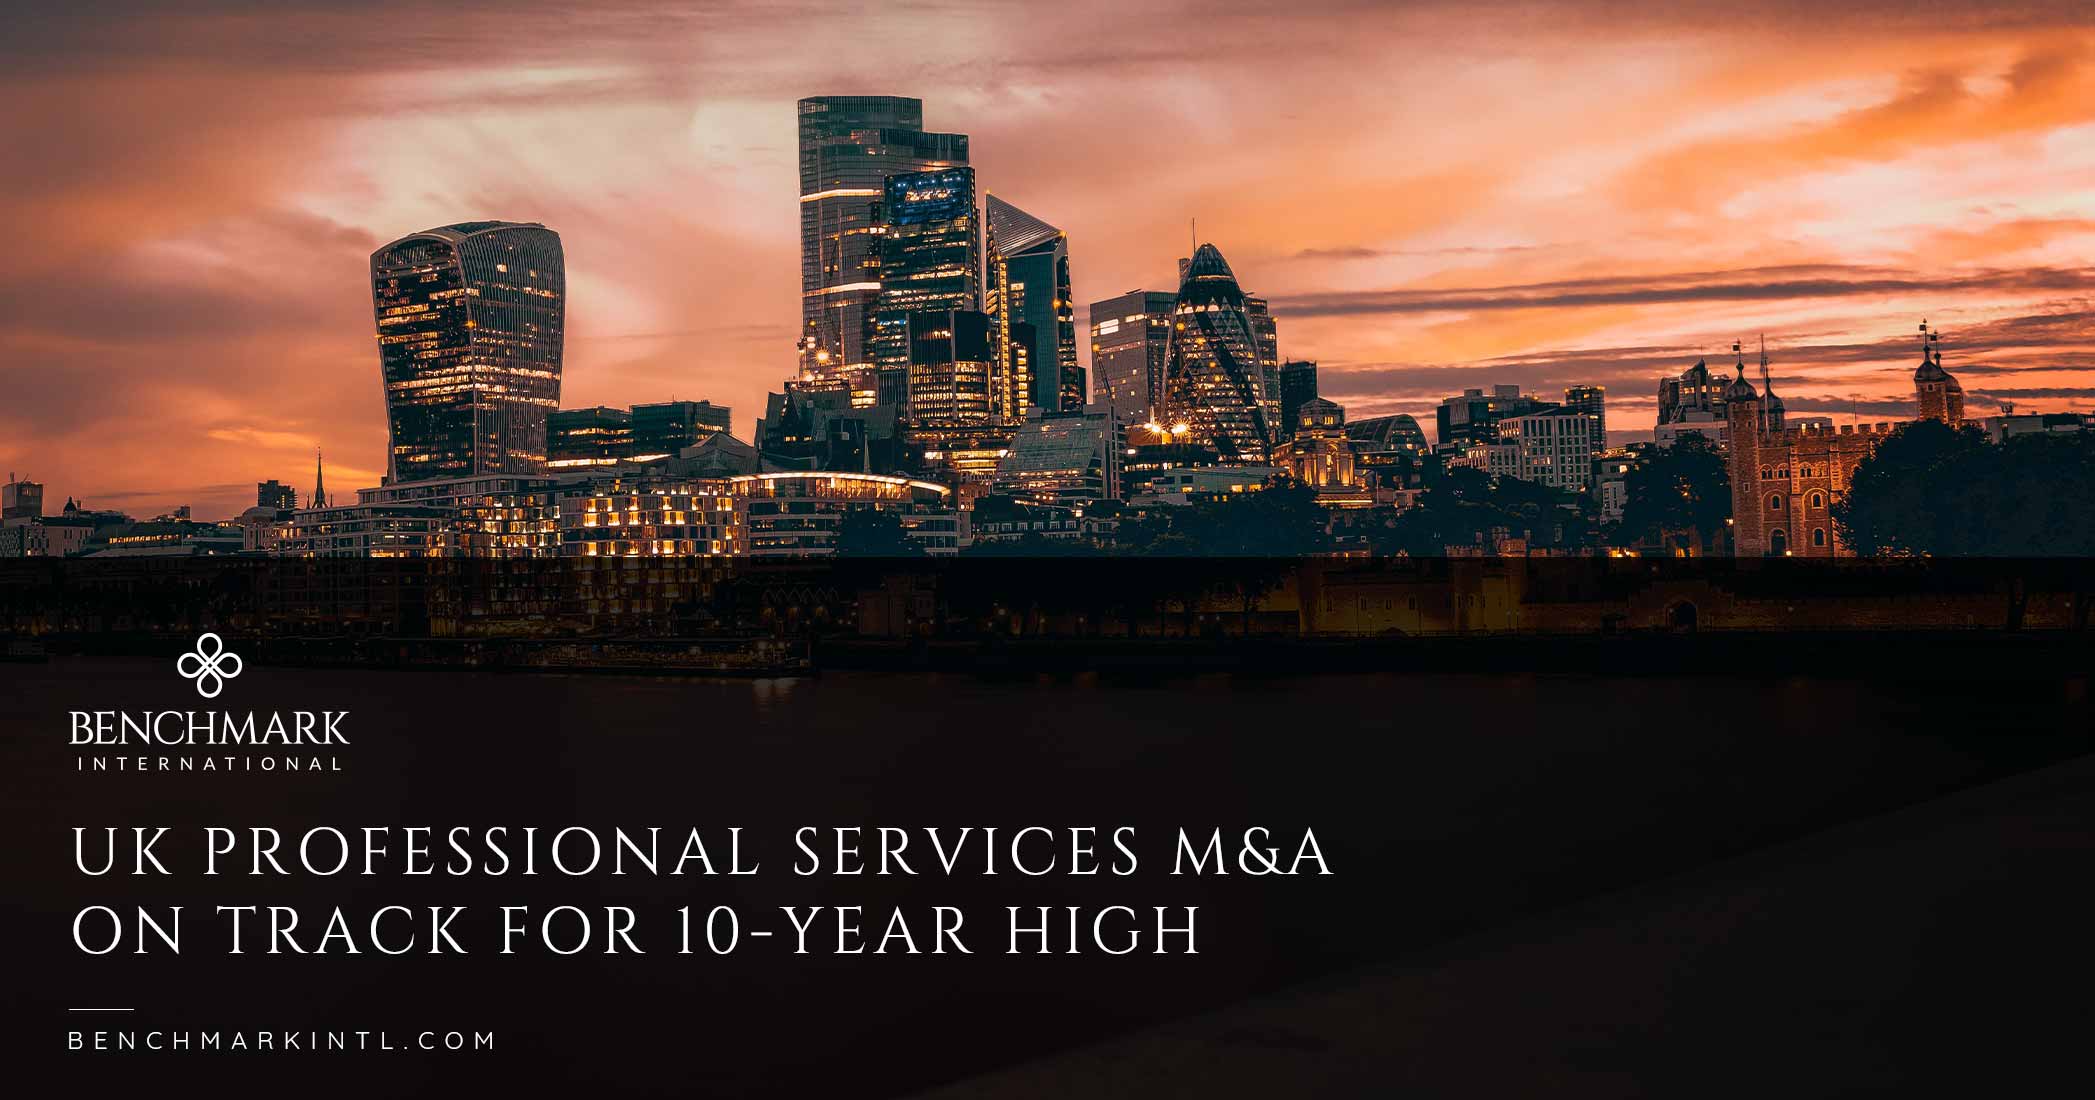 UK Professional Services M&A on Track for 10-Year High